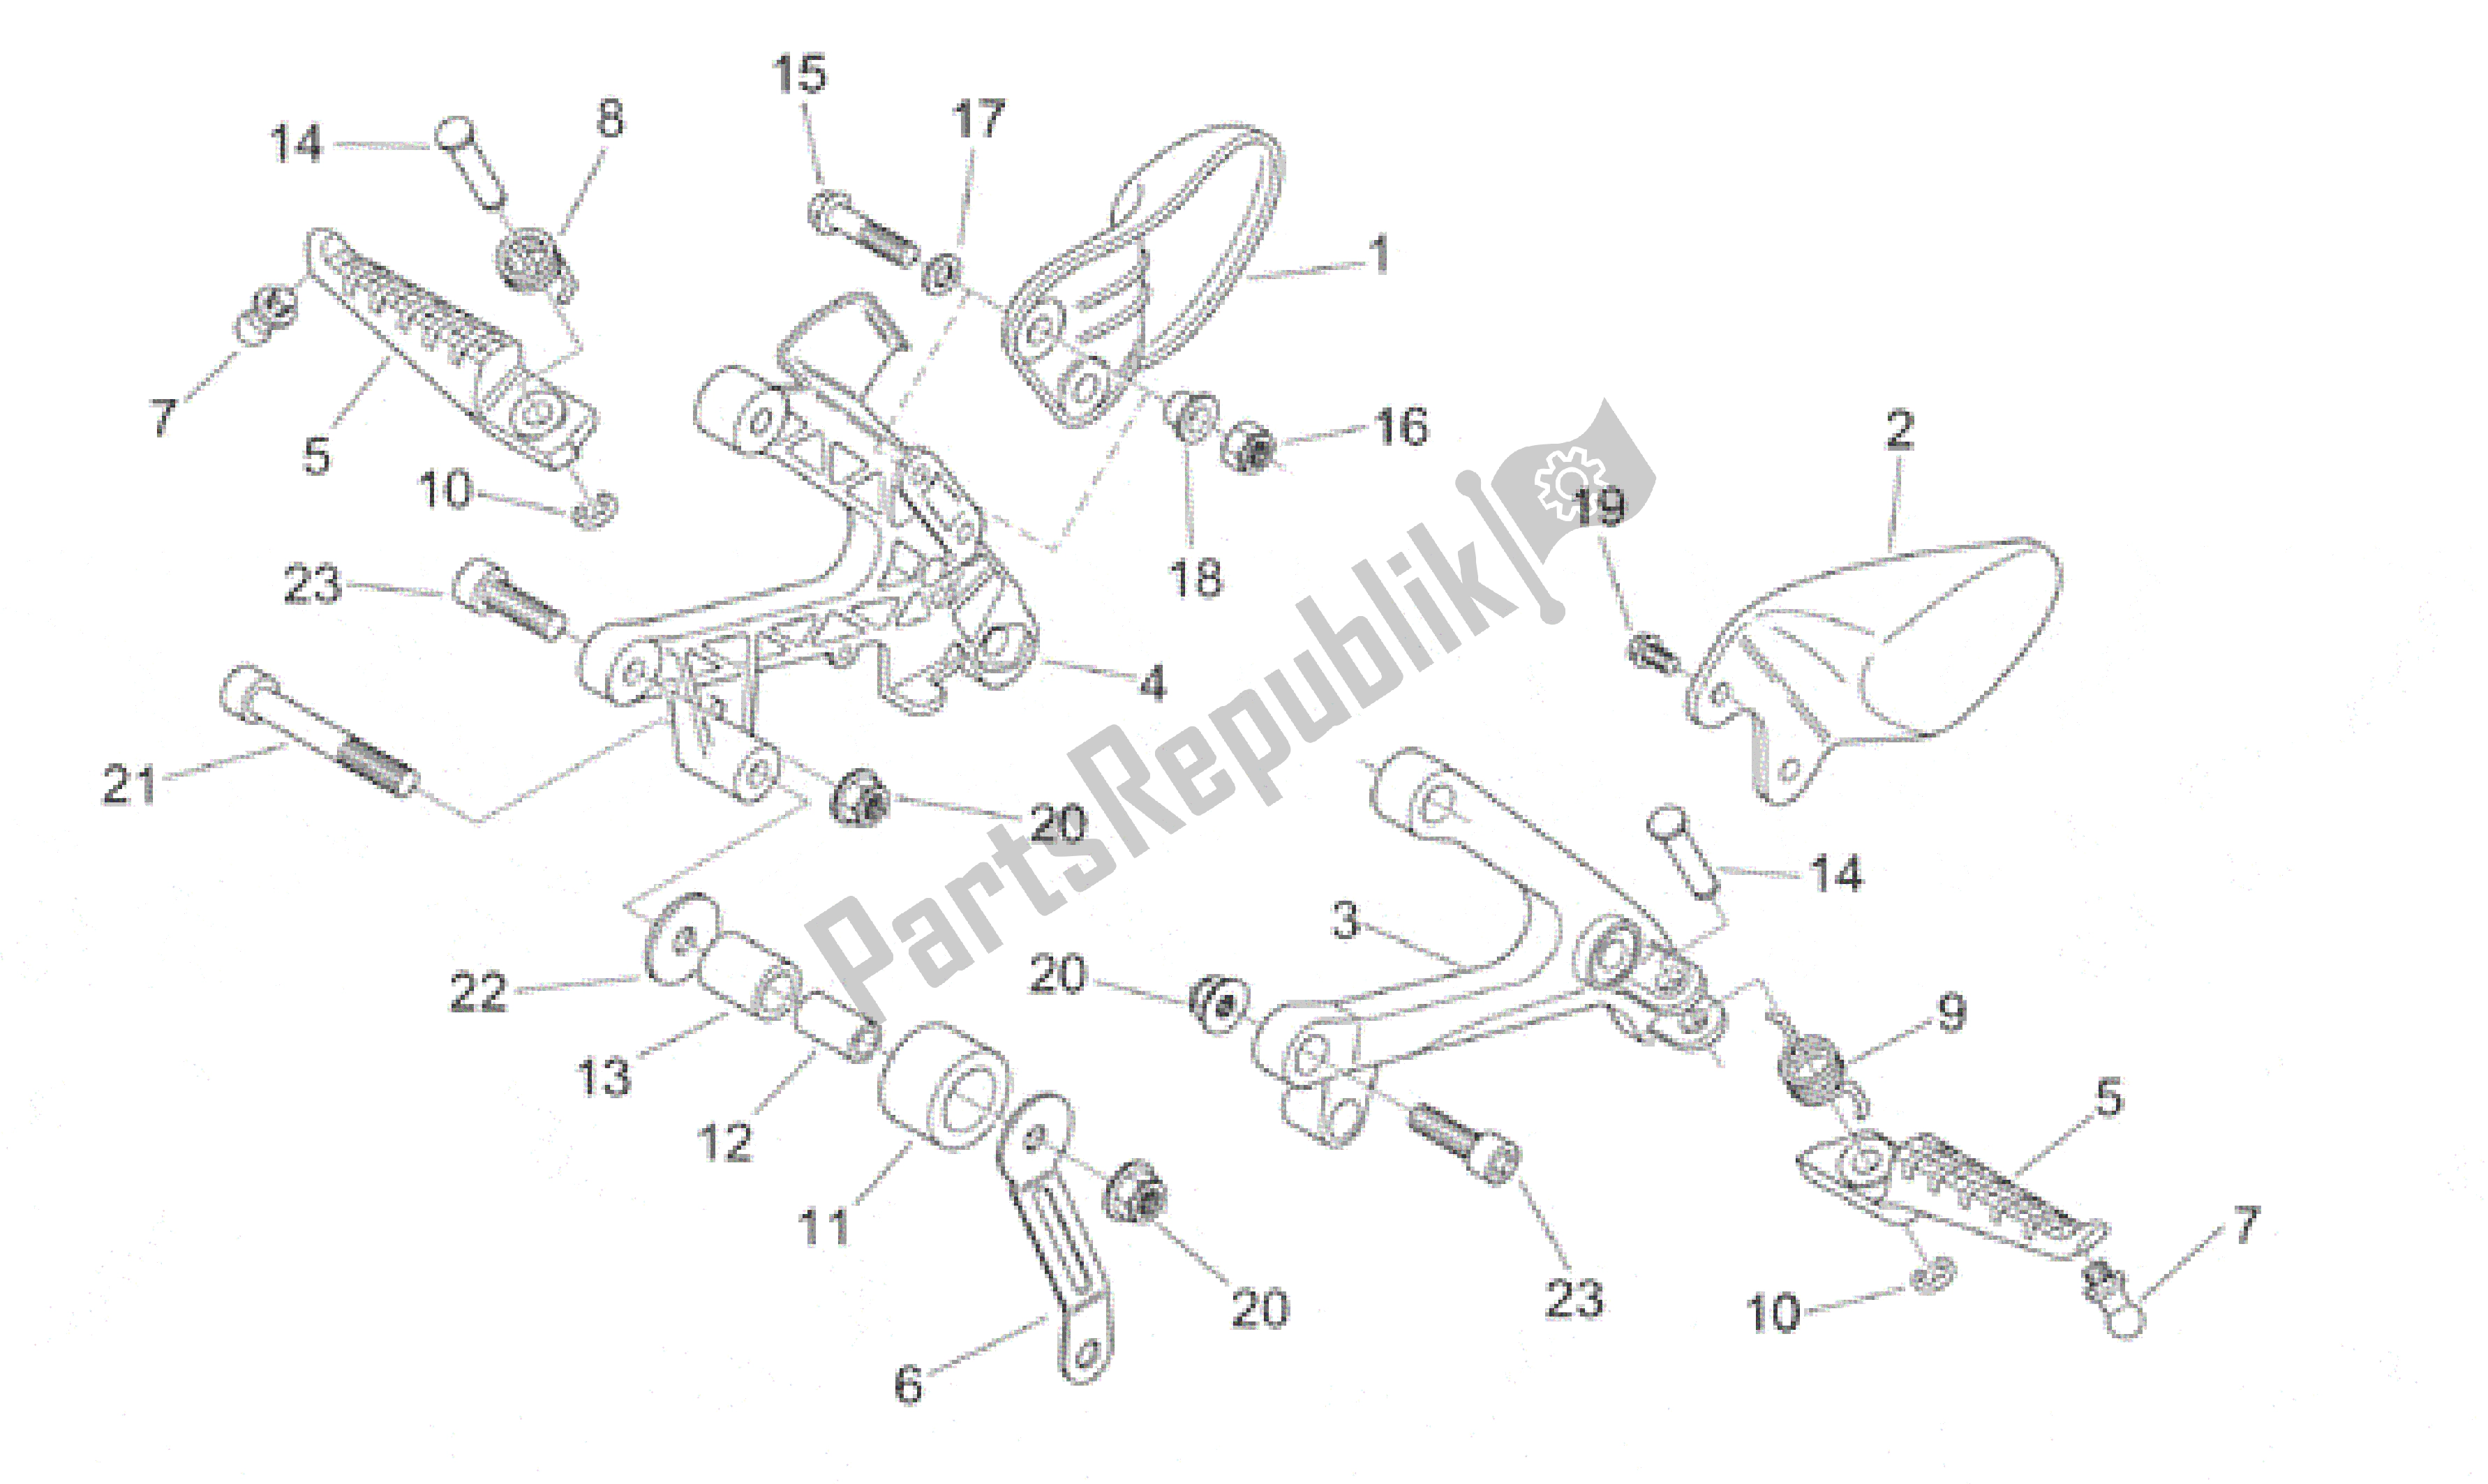 All parts for the Front Footrests of the Aprilia RS 125 1999 - 2001